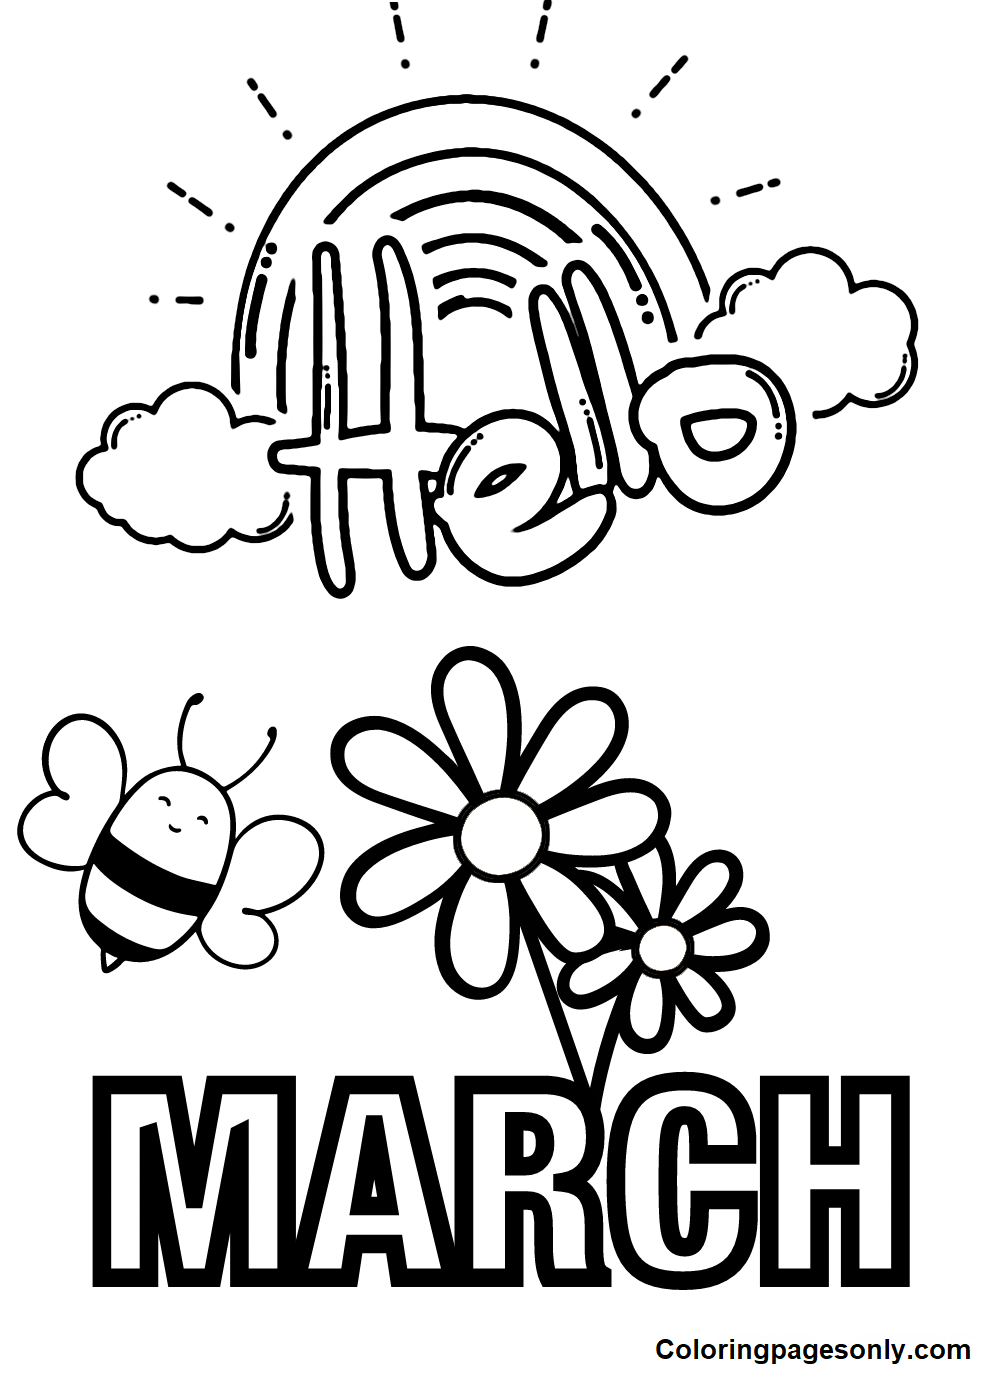 March 2023 calendar Coloring Pages - Free Printable Coloring Pages